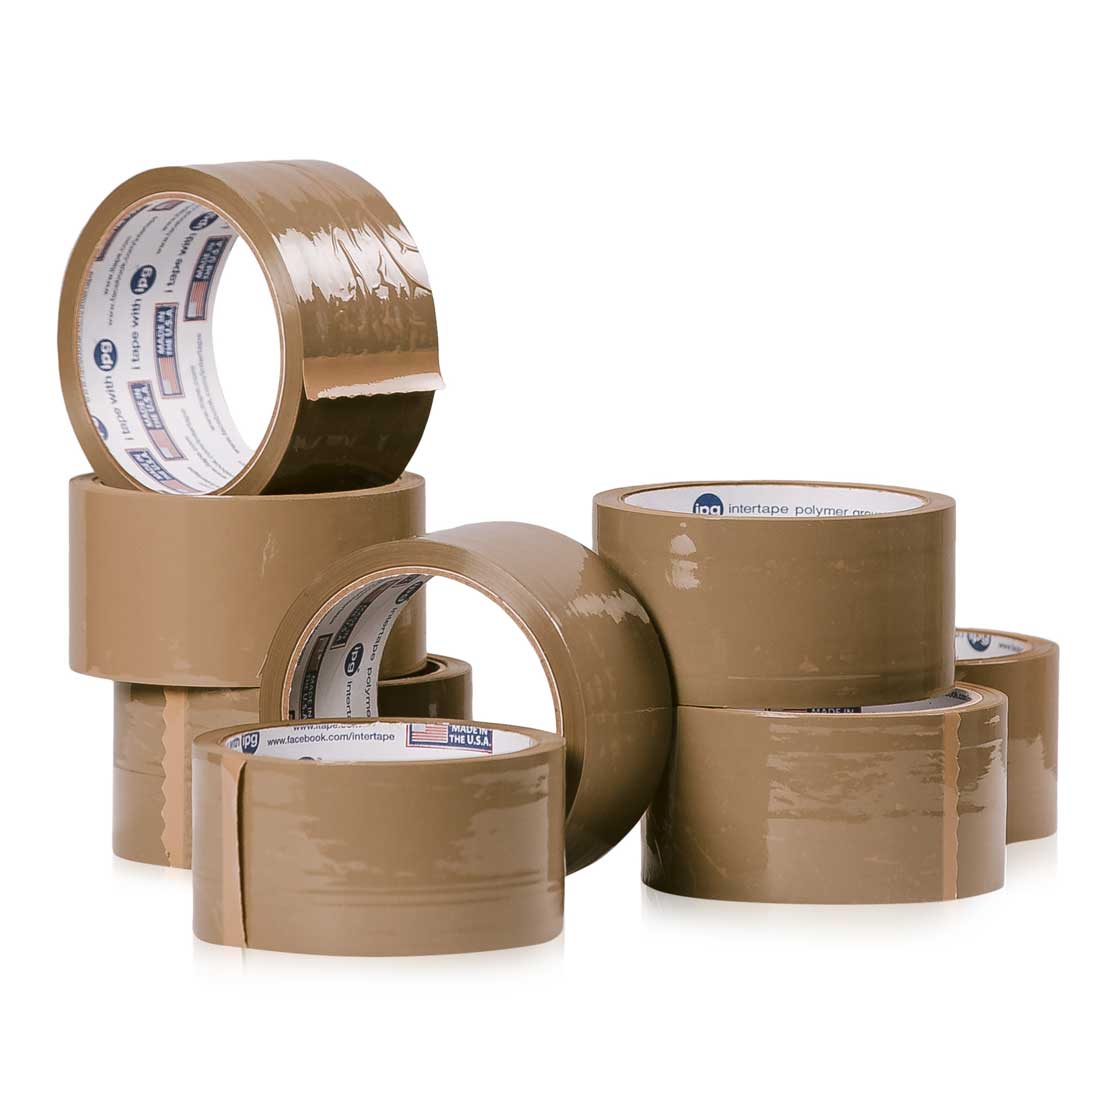 Packing tape for sealing boxes whilst moving house or office